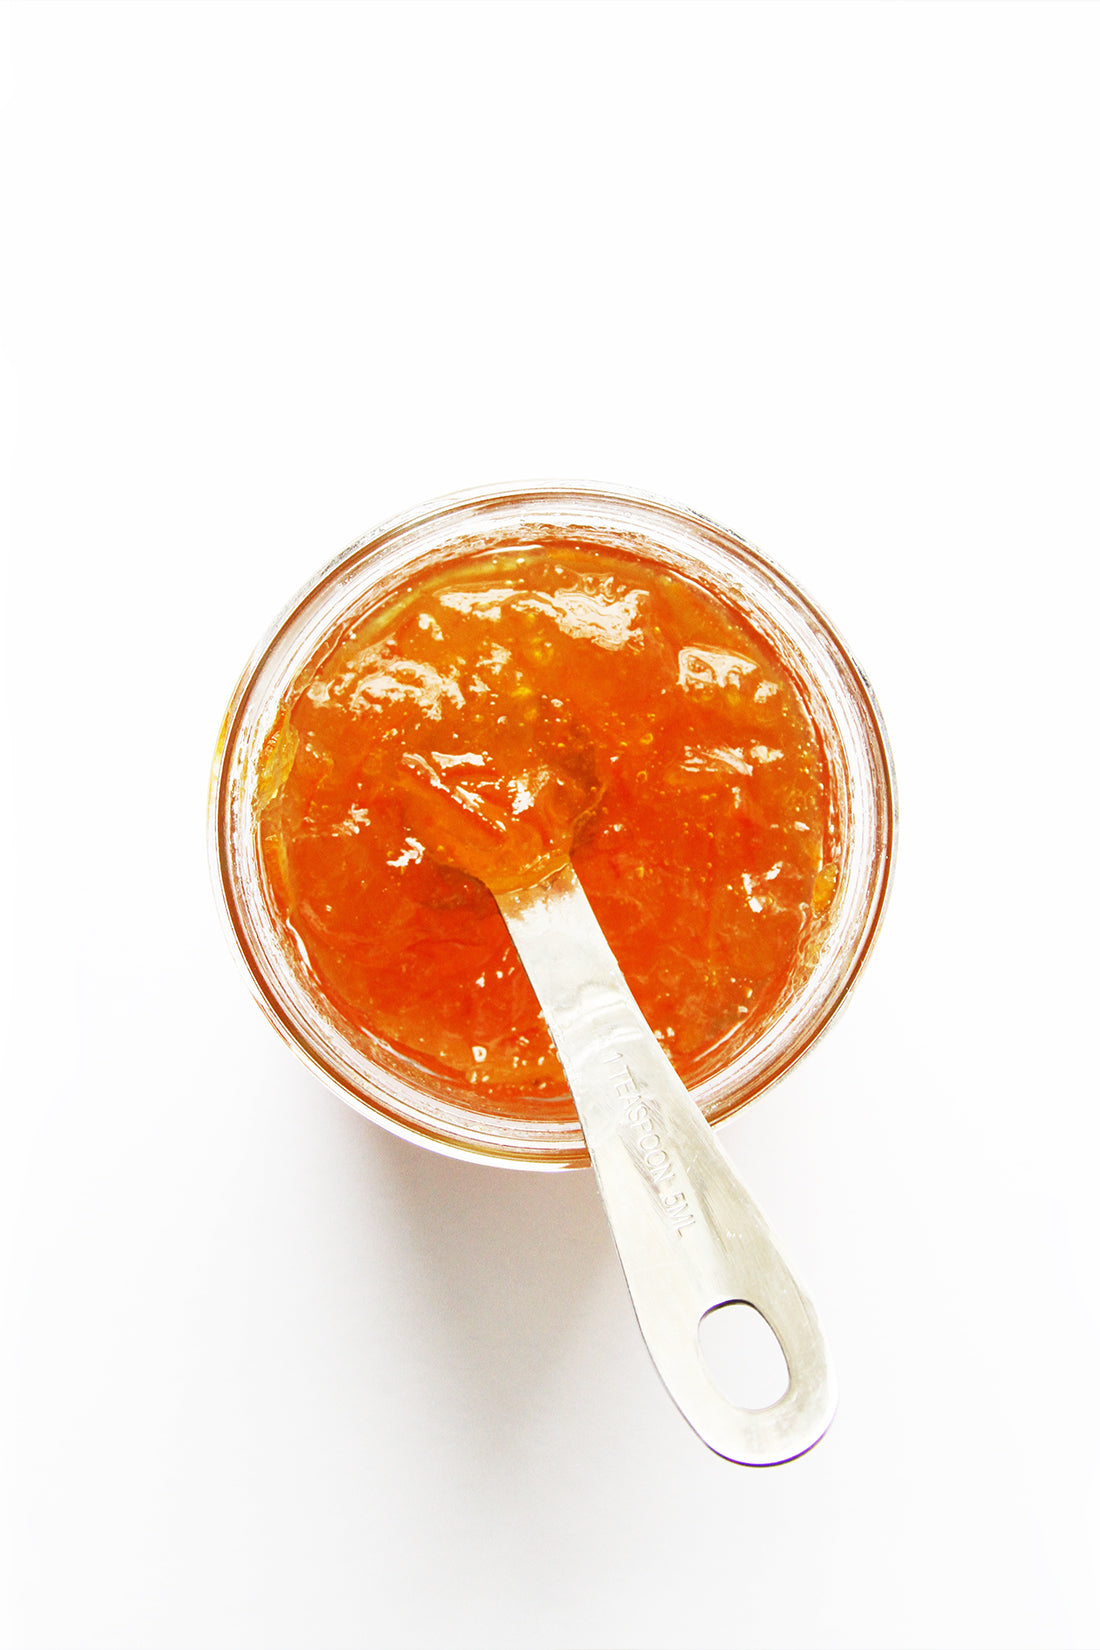 Image of a bowl of orange marmalade with a measuring spoon in it for Miss Jones Baking Co Marmalade Madeleines